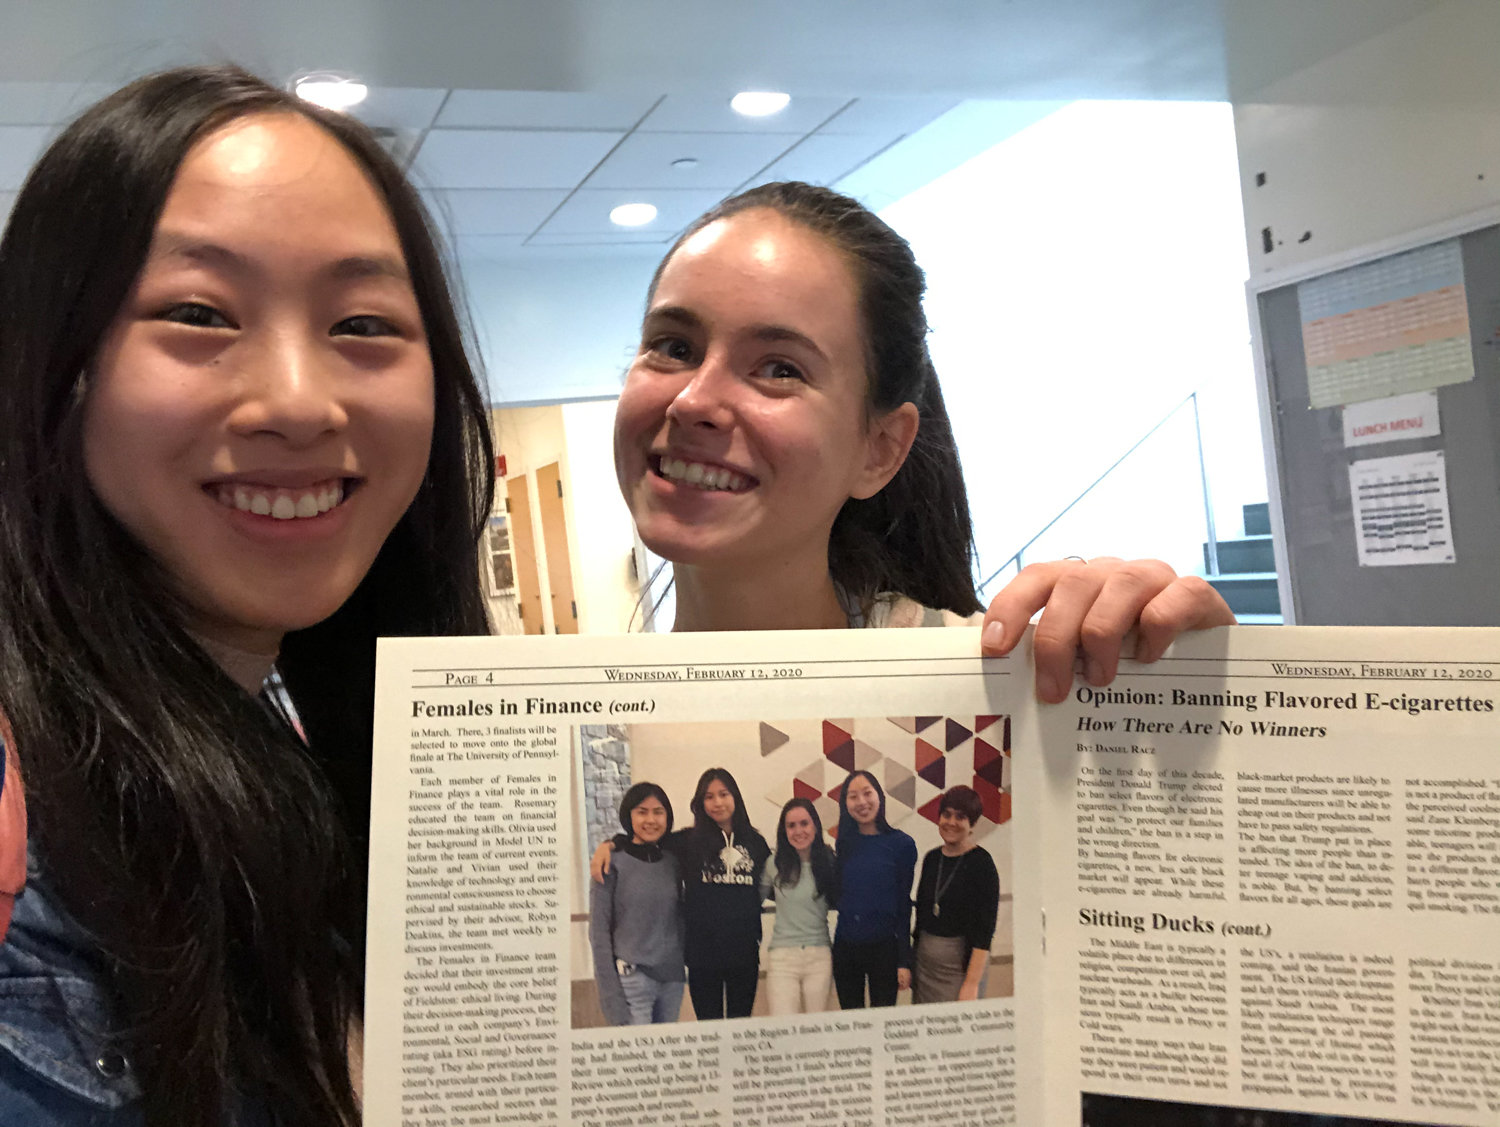 Olivia Pollack and Rosemary Jiang were thrilled about being featured in the Feb. 12 issue of The Fieldston News. Pollack and Jiang are members of Ethical Culture Fieldston School’s Females in Finance Club, which had an impressive first year before the coronavirus pandemic intervened.